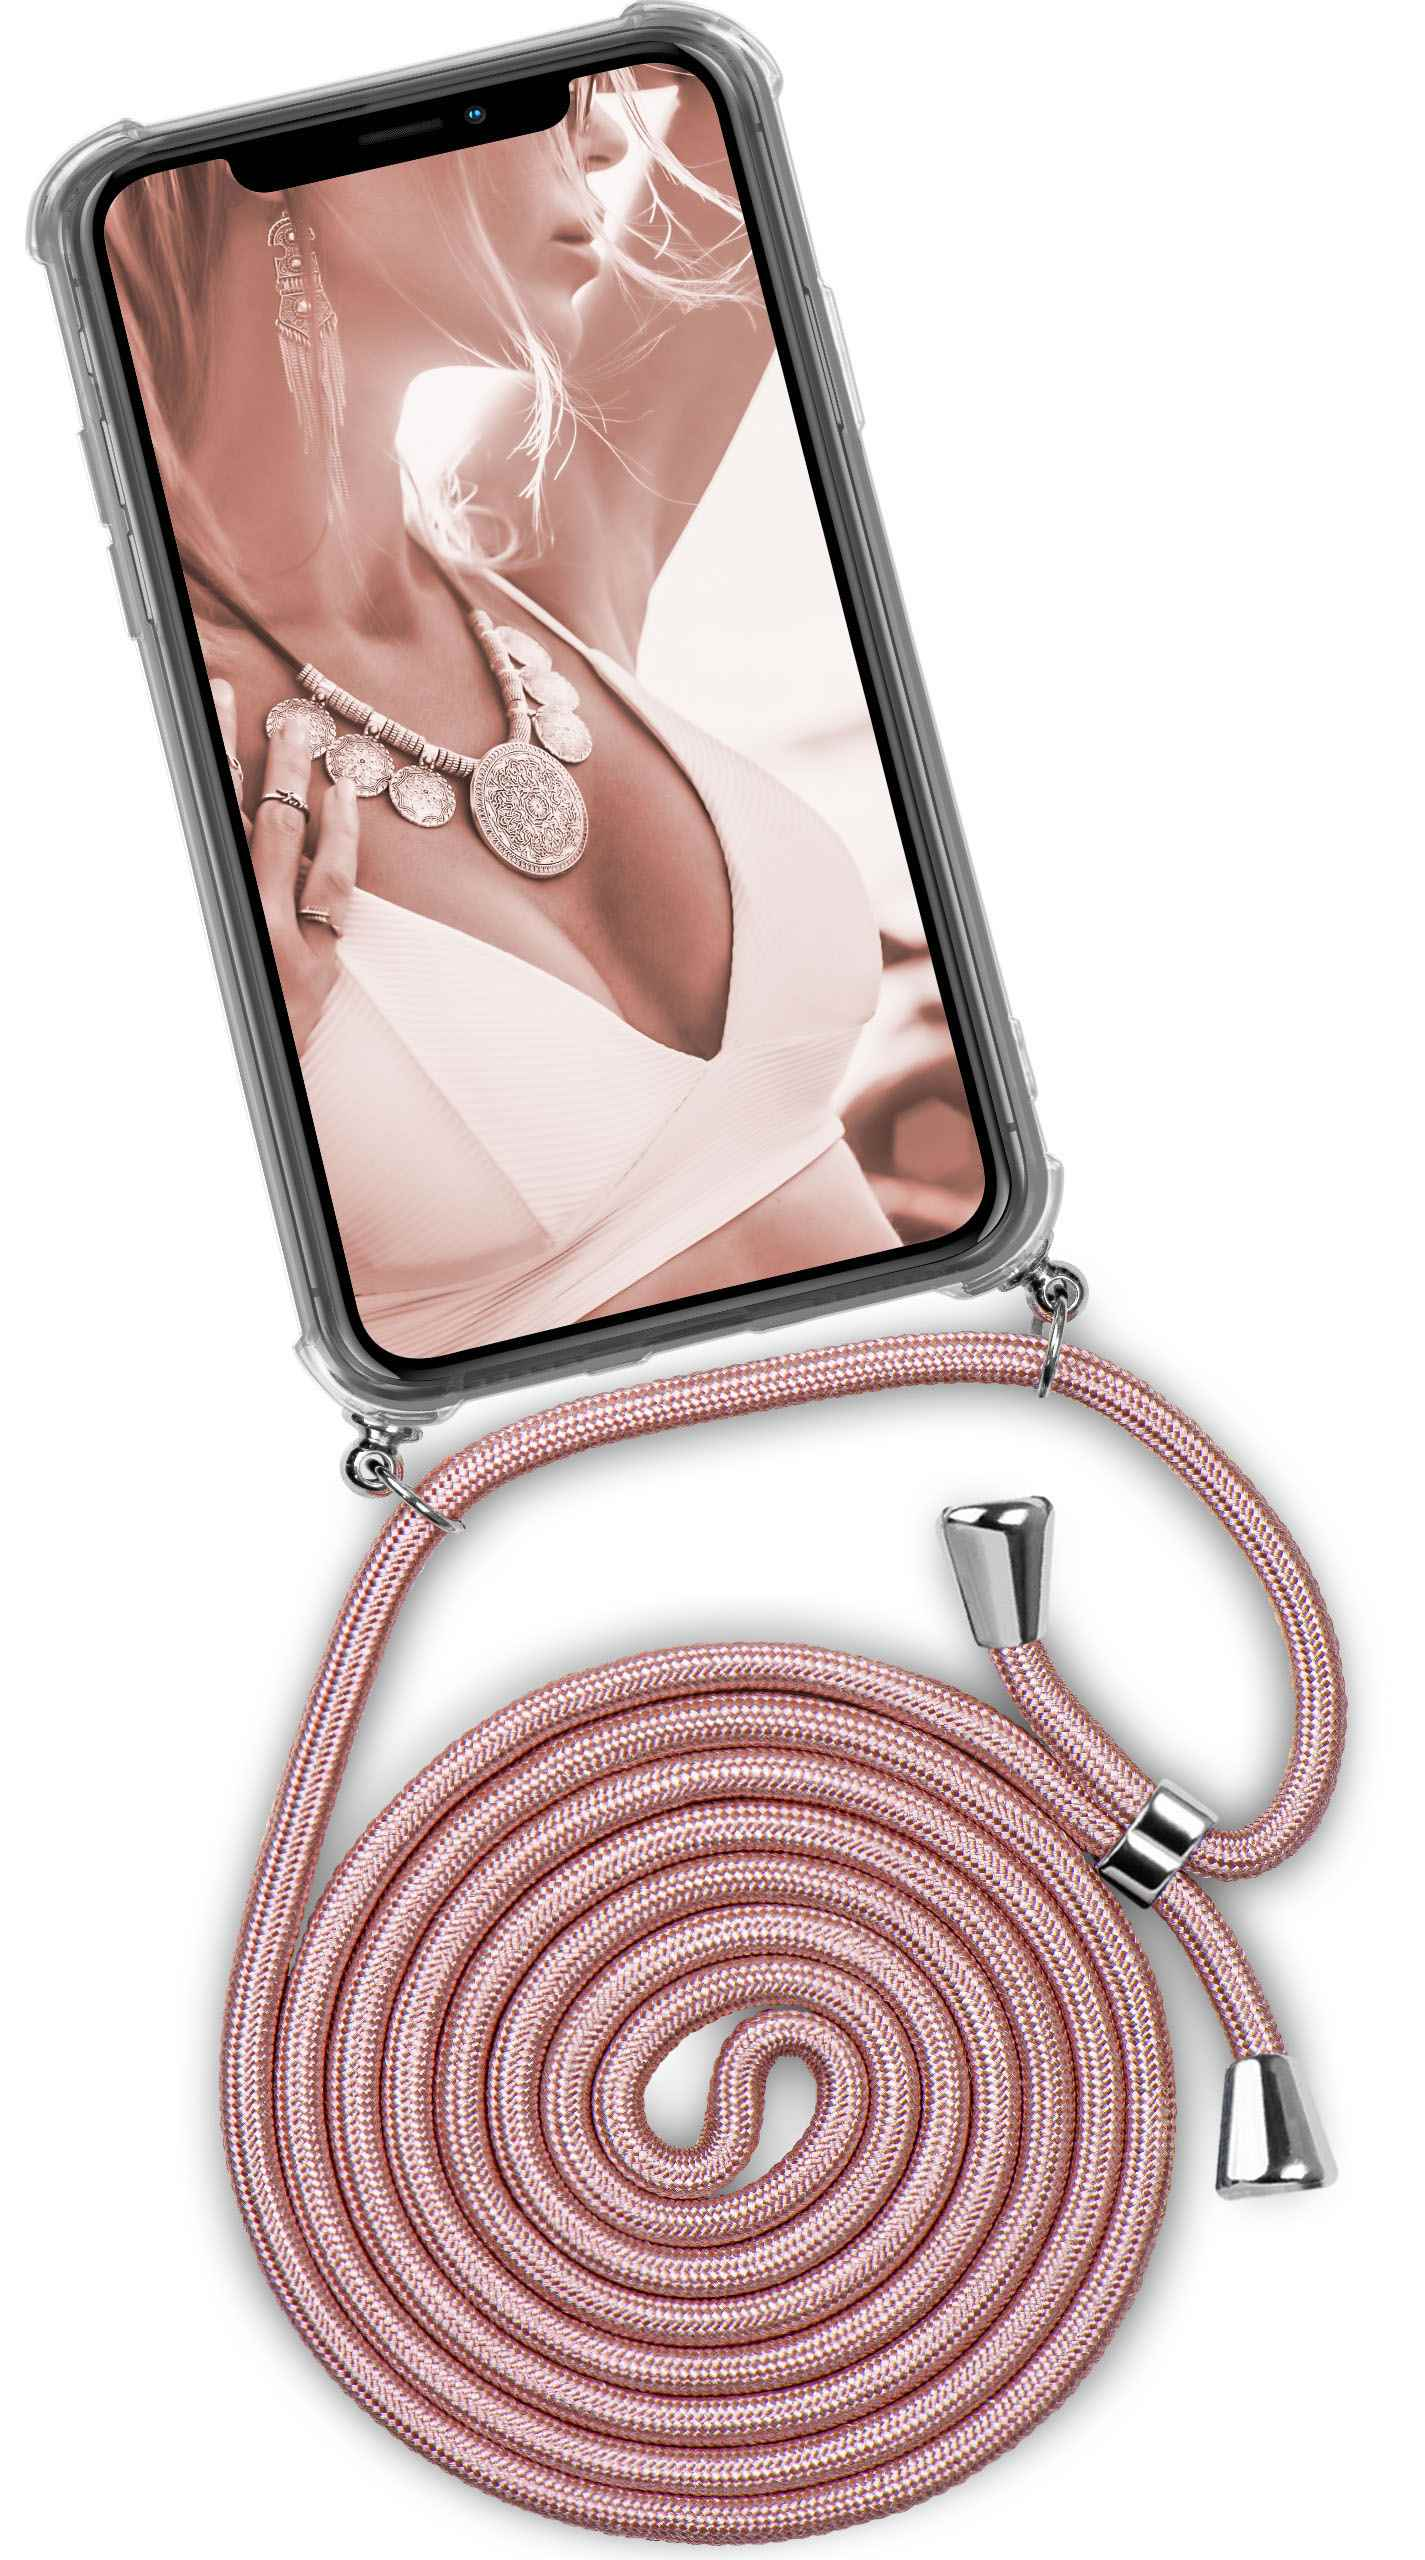 XS Max, Backcover, iPhone Apple, (Silber) Case, Blush Shiny ONEFLOW Twist